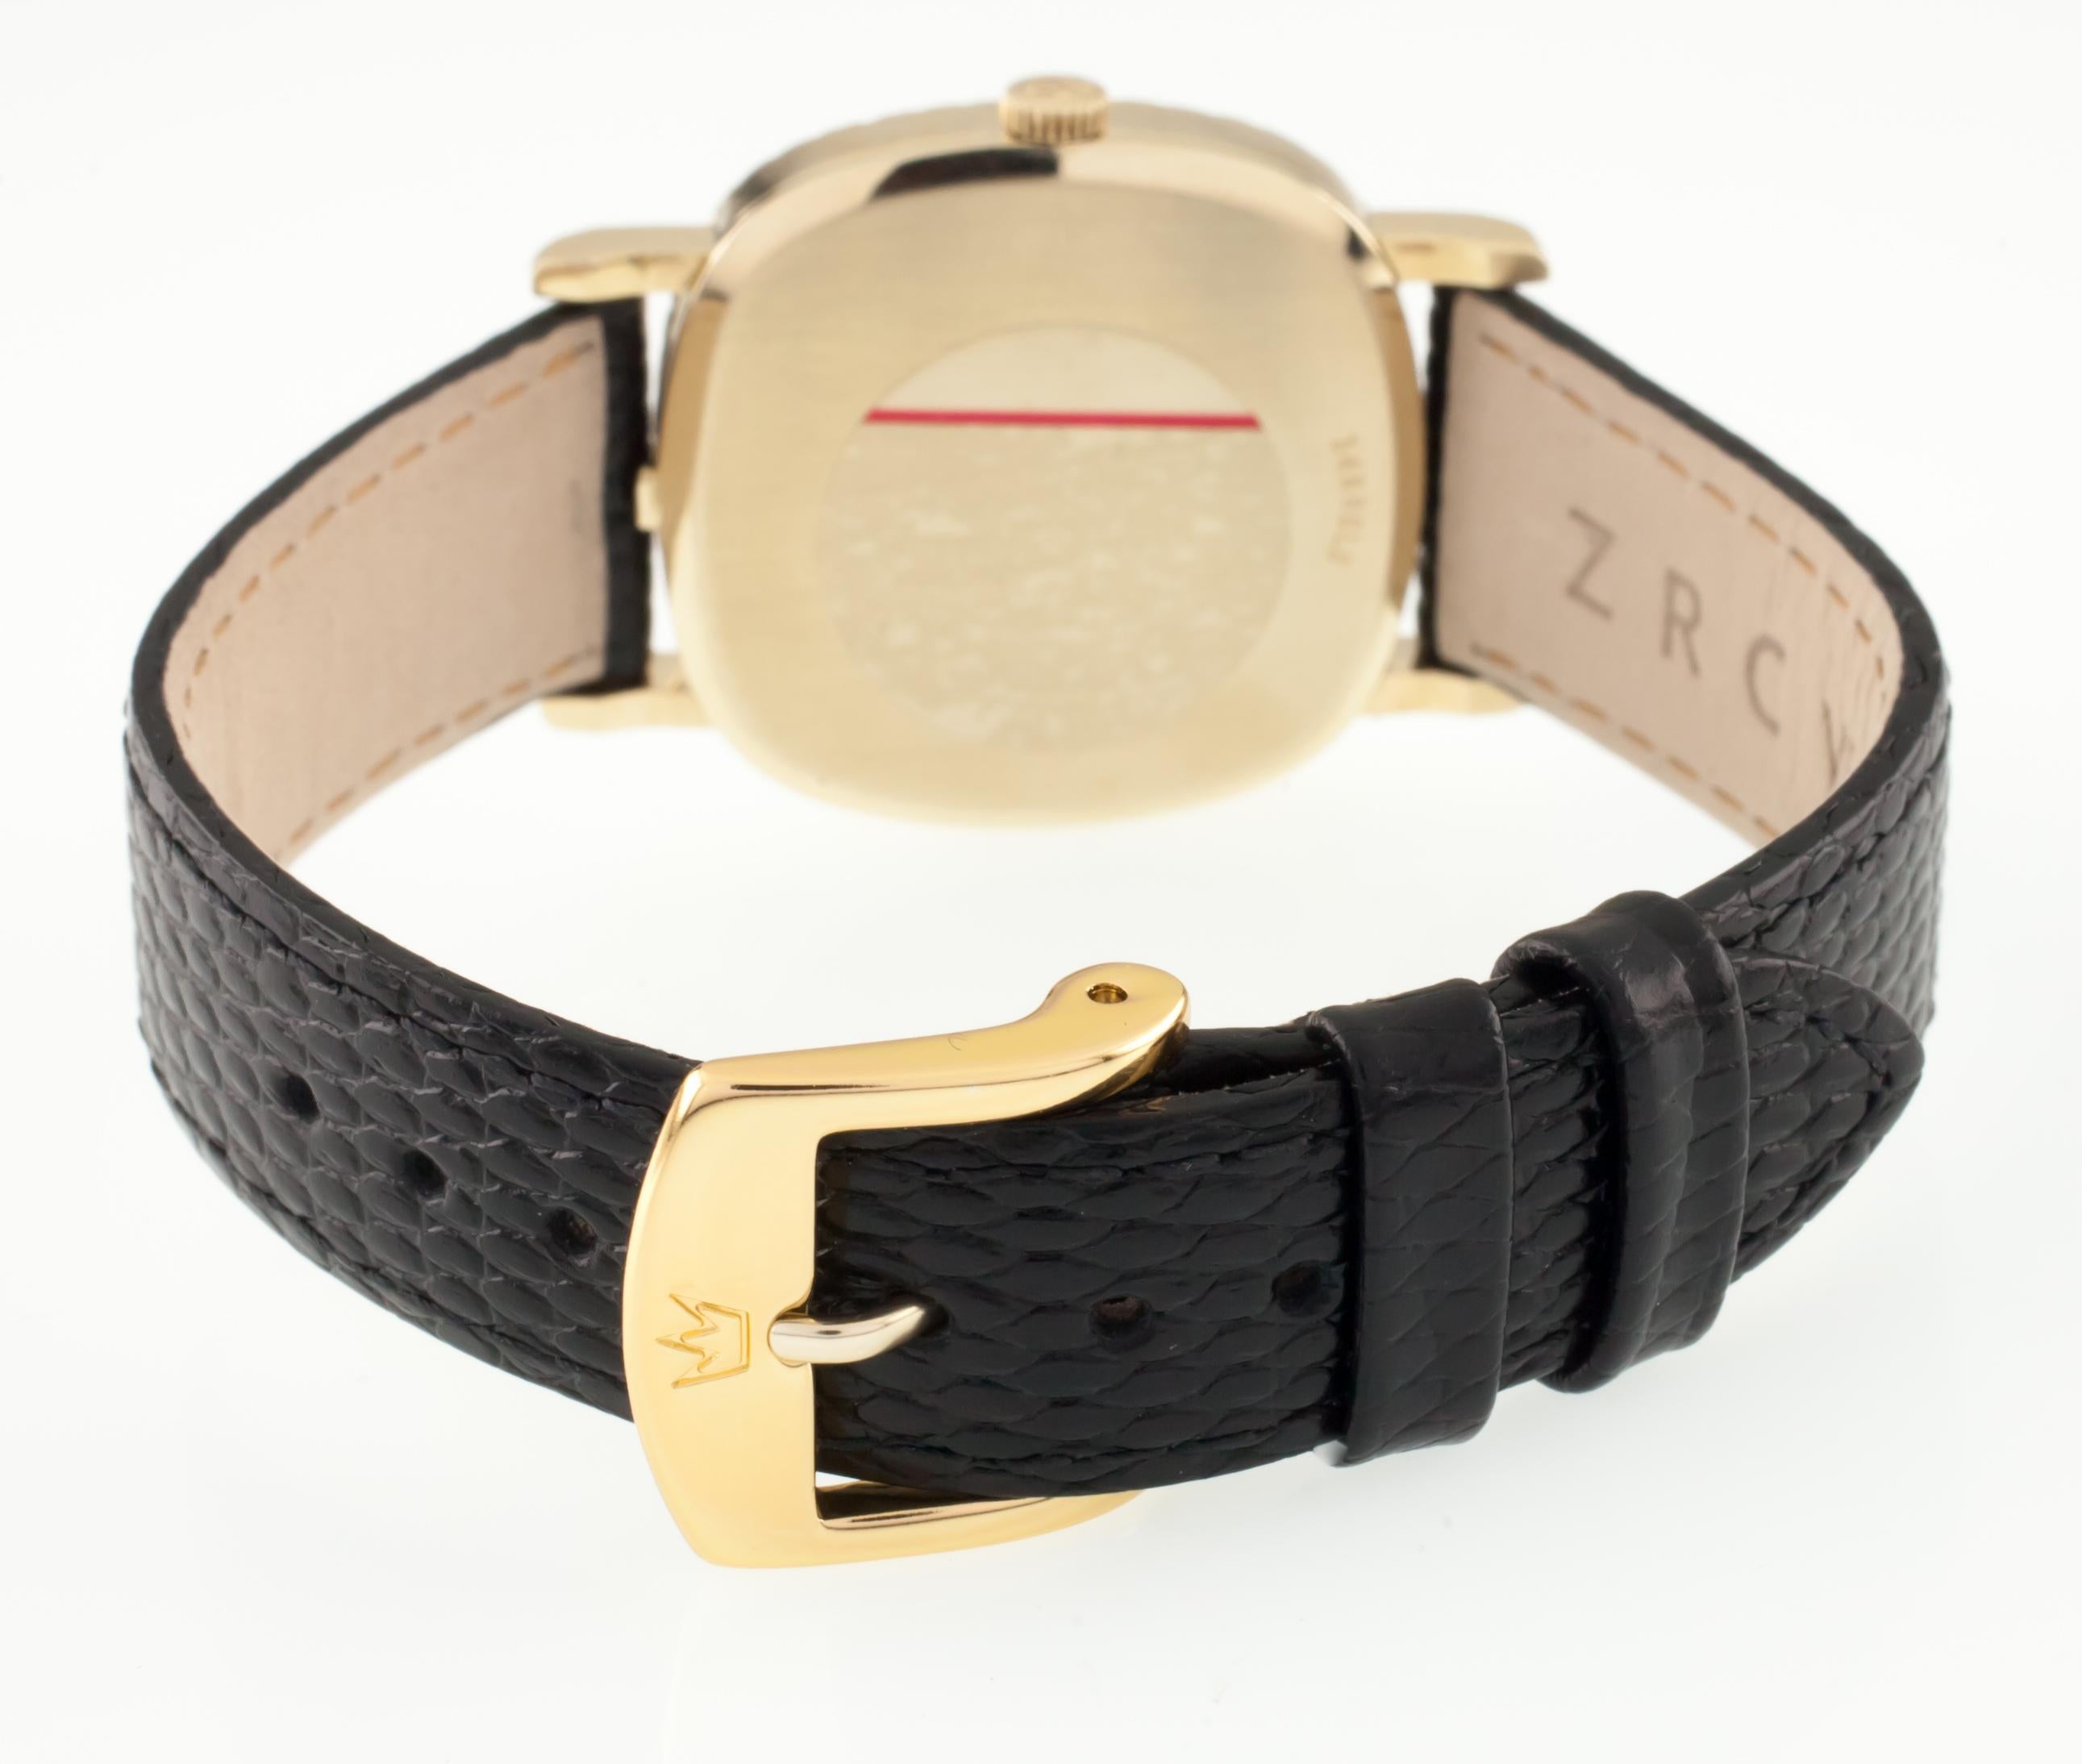 14k gold watch with leather band